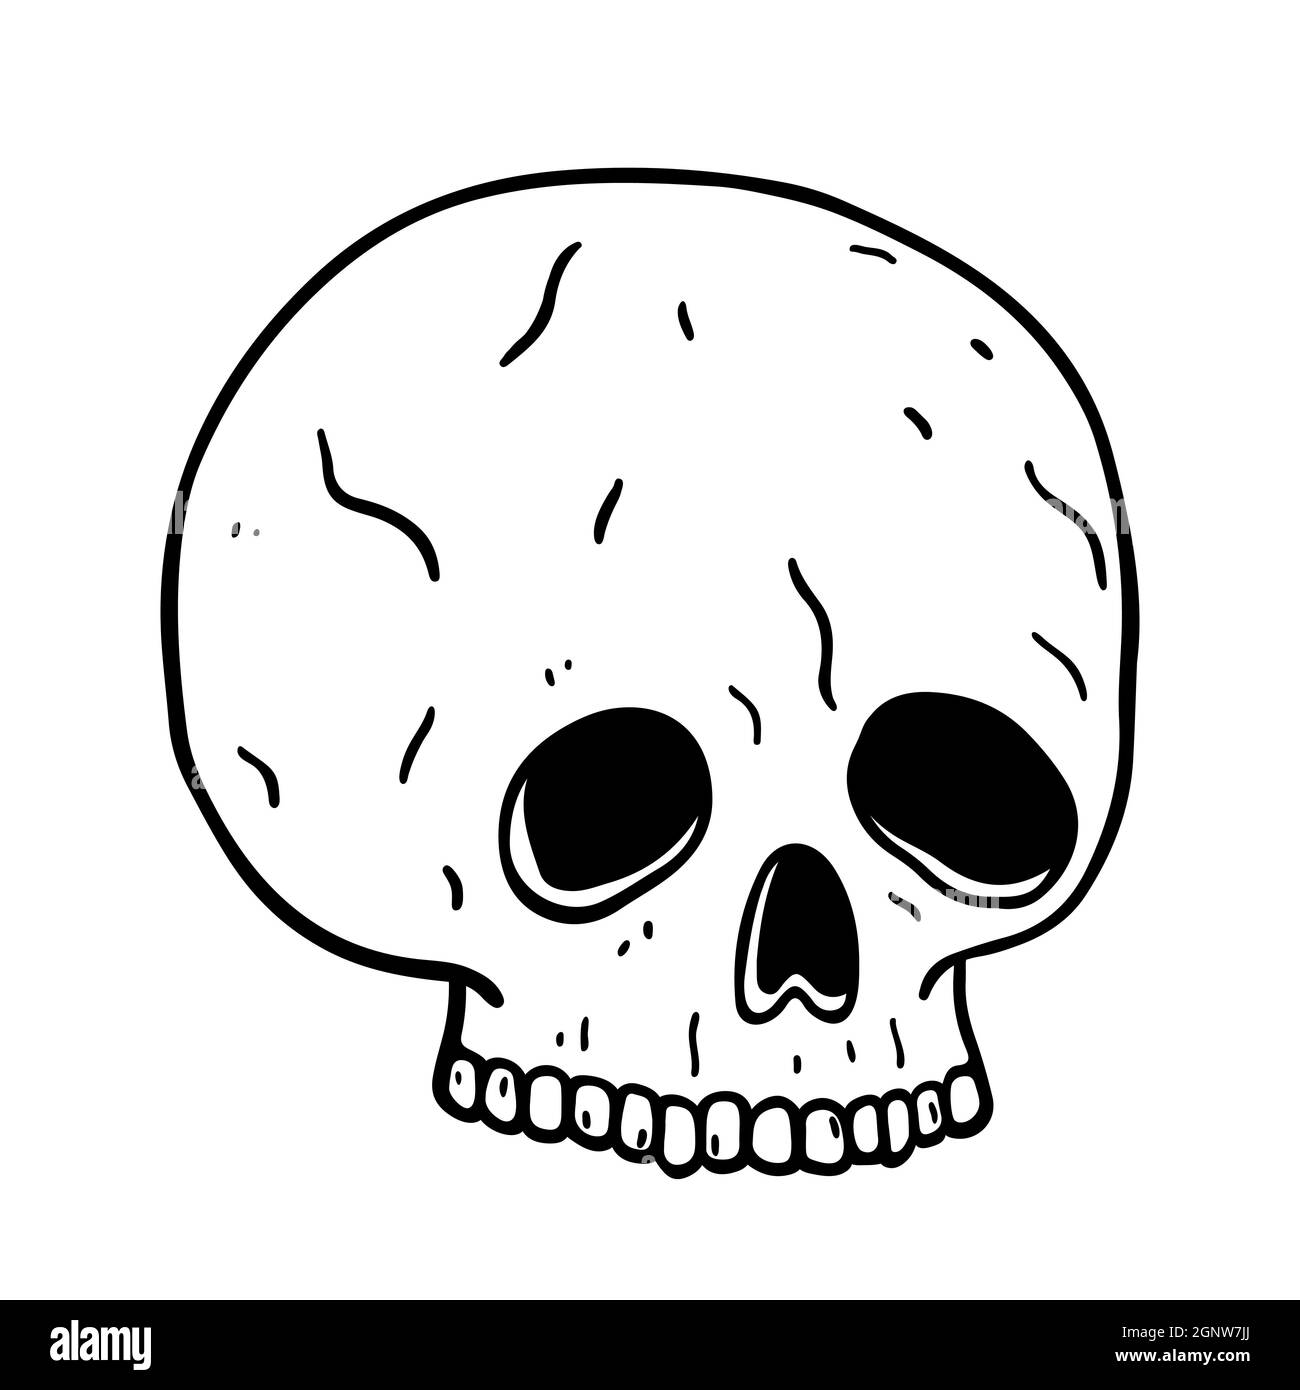 Spooky human skull isolated on white background. Creepy and scary face of a dead man. Hand-drawn vector illustration in doodle style. Perfect for Halloween designs, cards, decorations, logo. Stock Vector